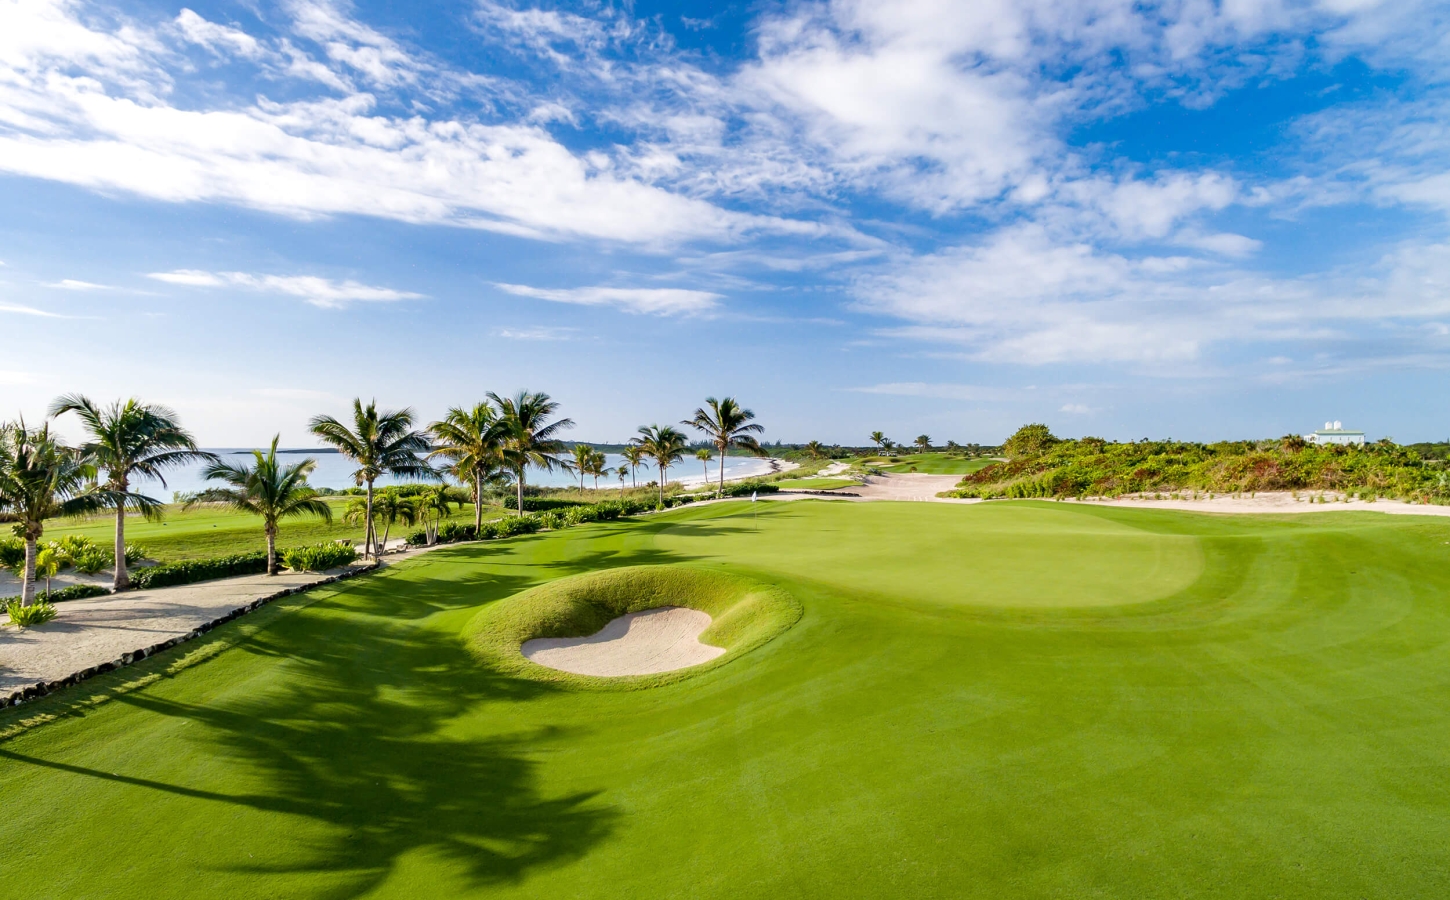 Pristine coastal scenery at The Abaco Club's 4th green, exemplifying a high-end golf club lifestyle